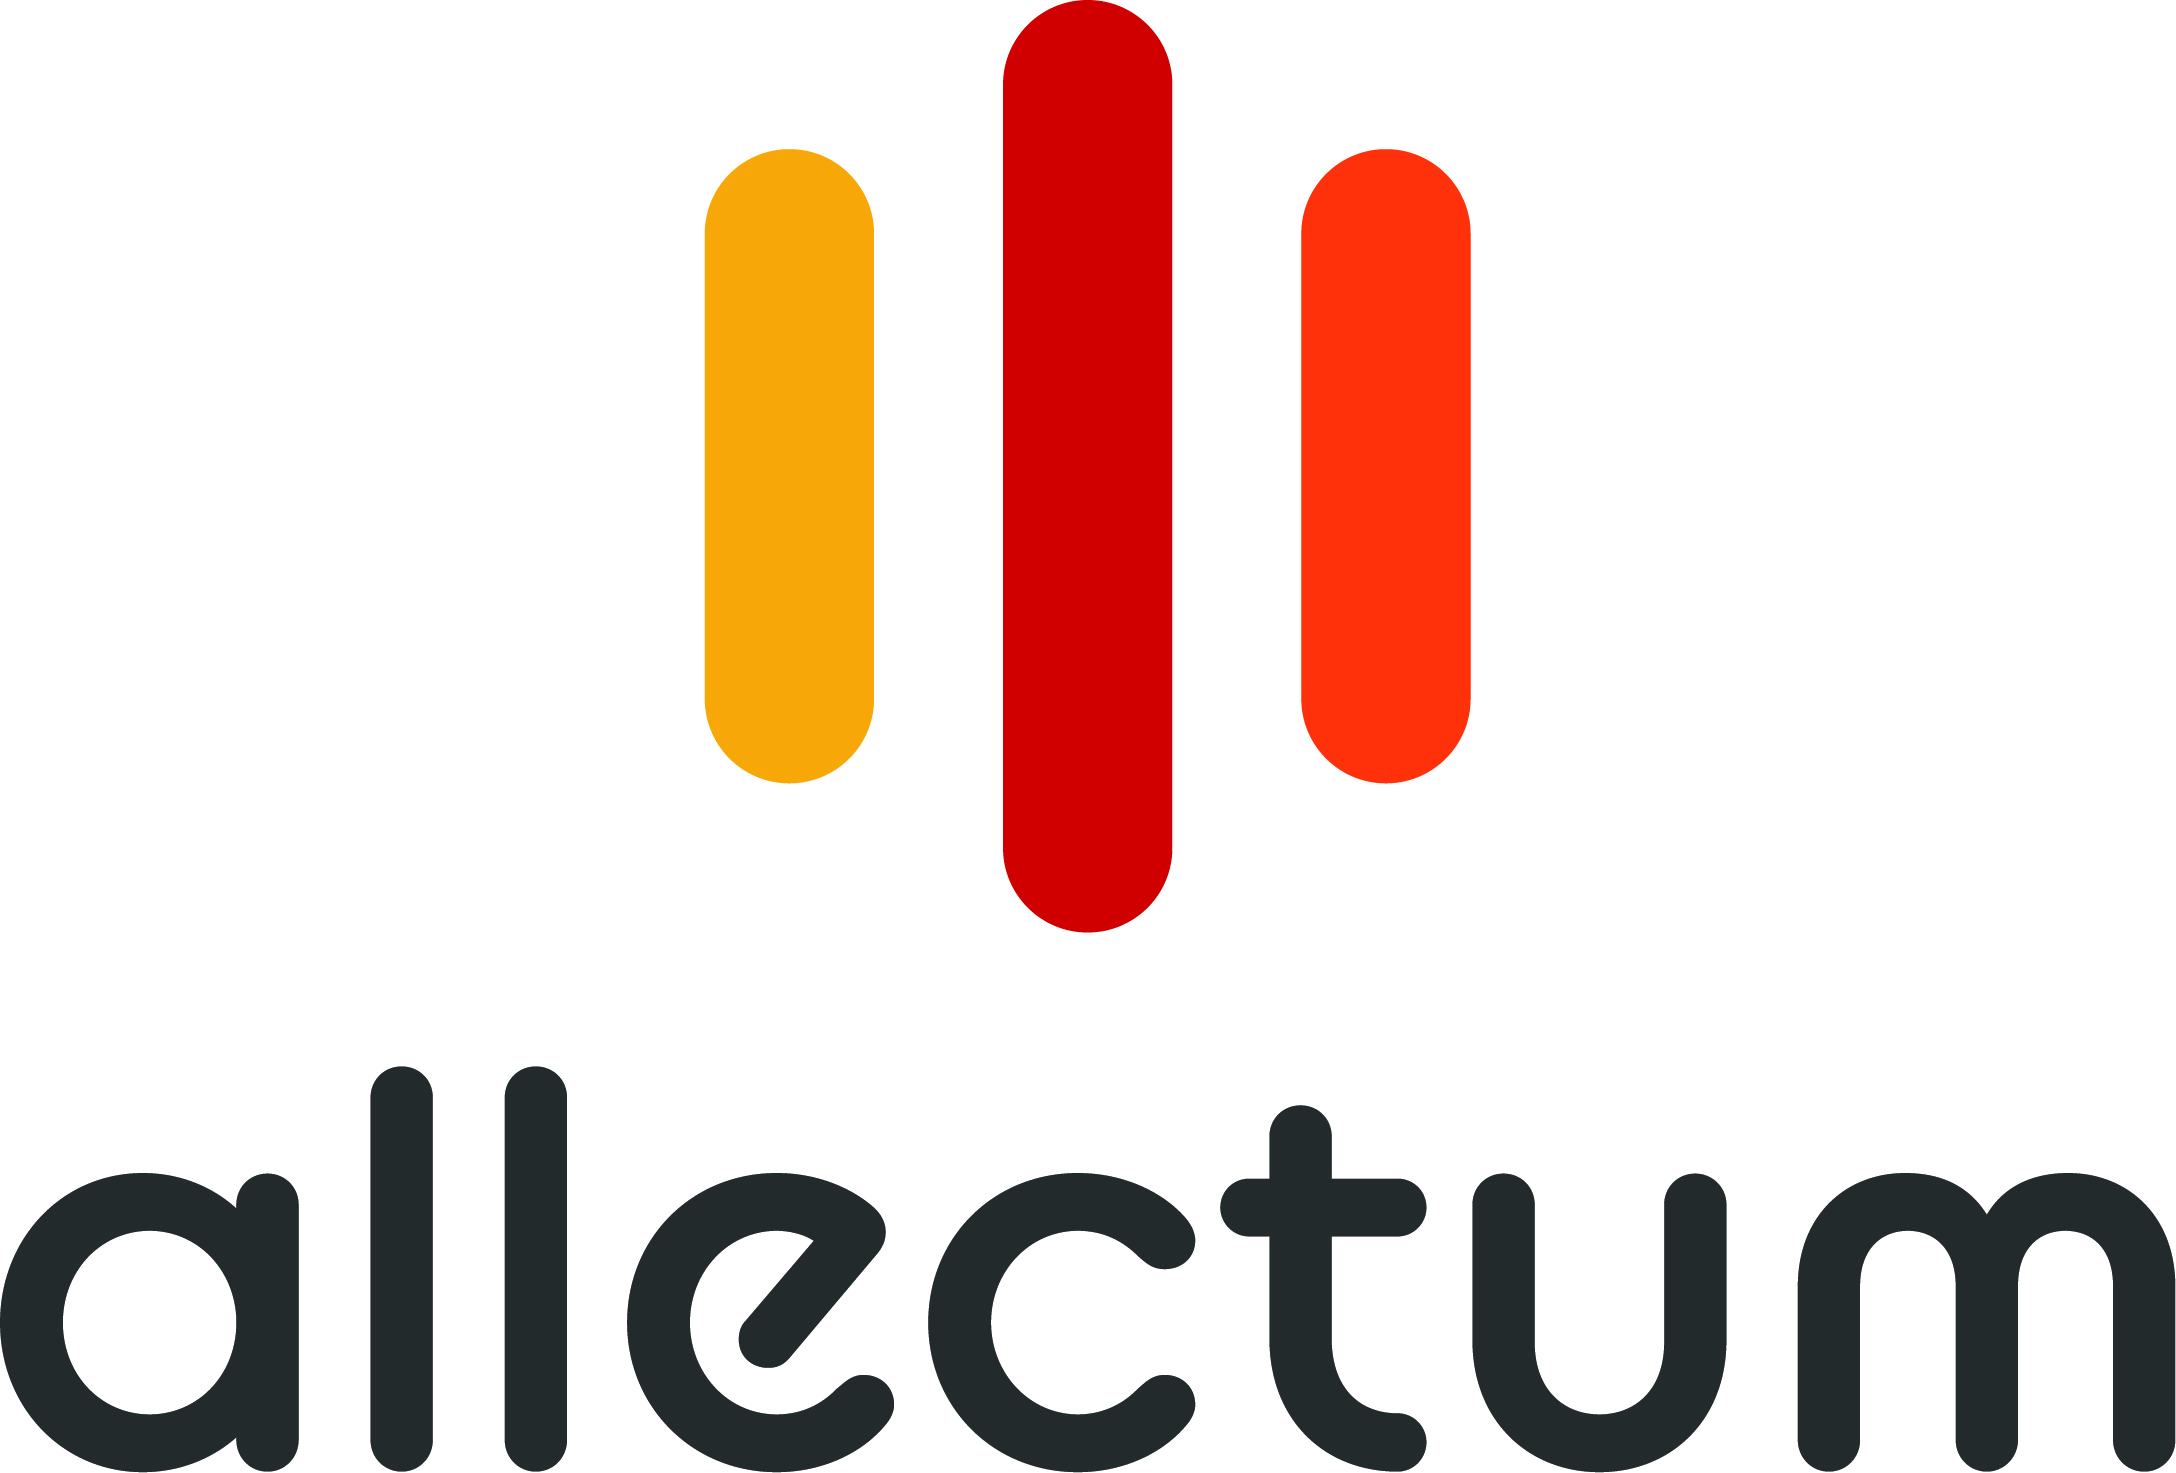 Black text reading allectum with three lines of yellow, red and orange above as a logo